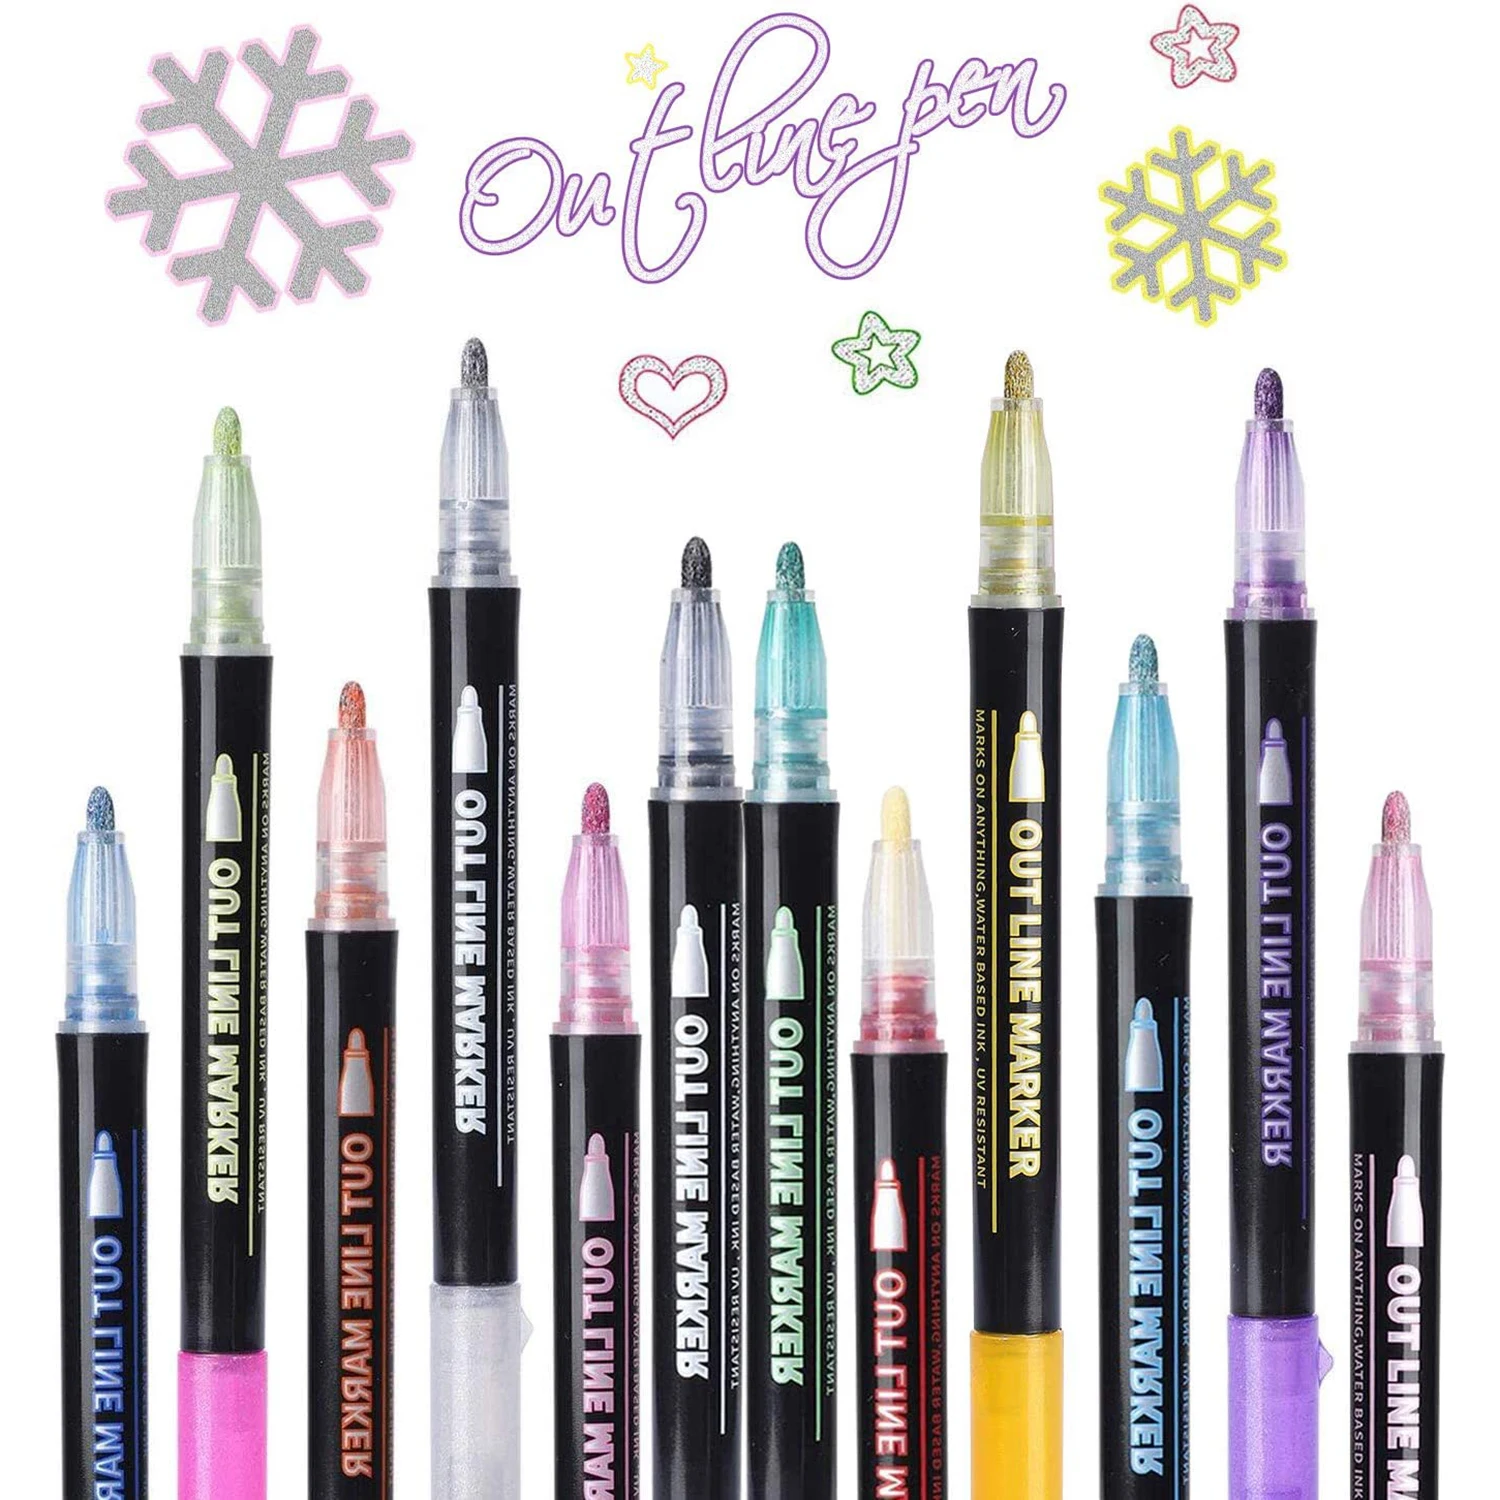 Double Line Metallic Markers Outline Metal Marker Pens 12/24 Colors Paint Permanent Pen for Writing and Drawing Lines on Paper